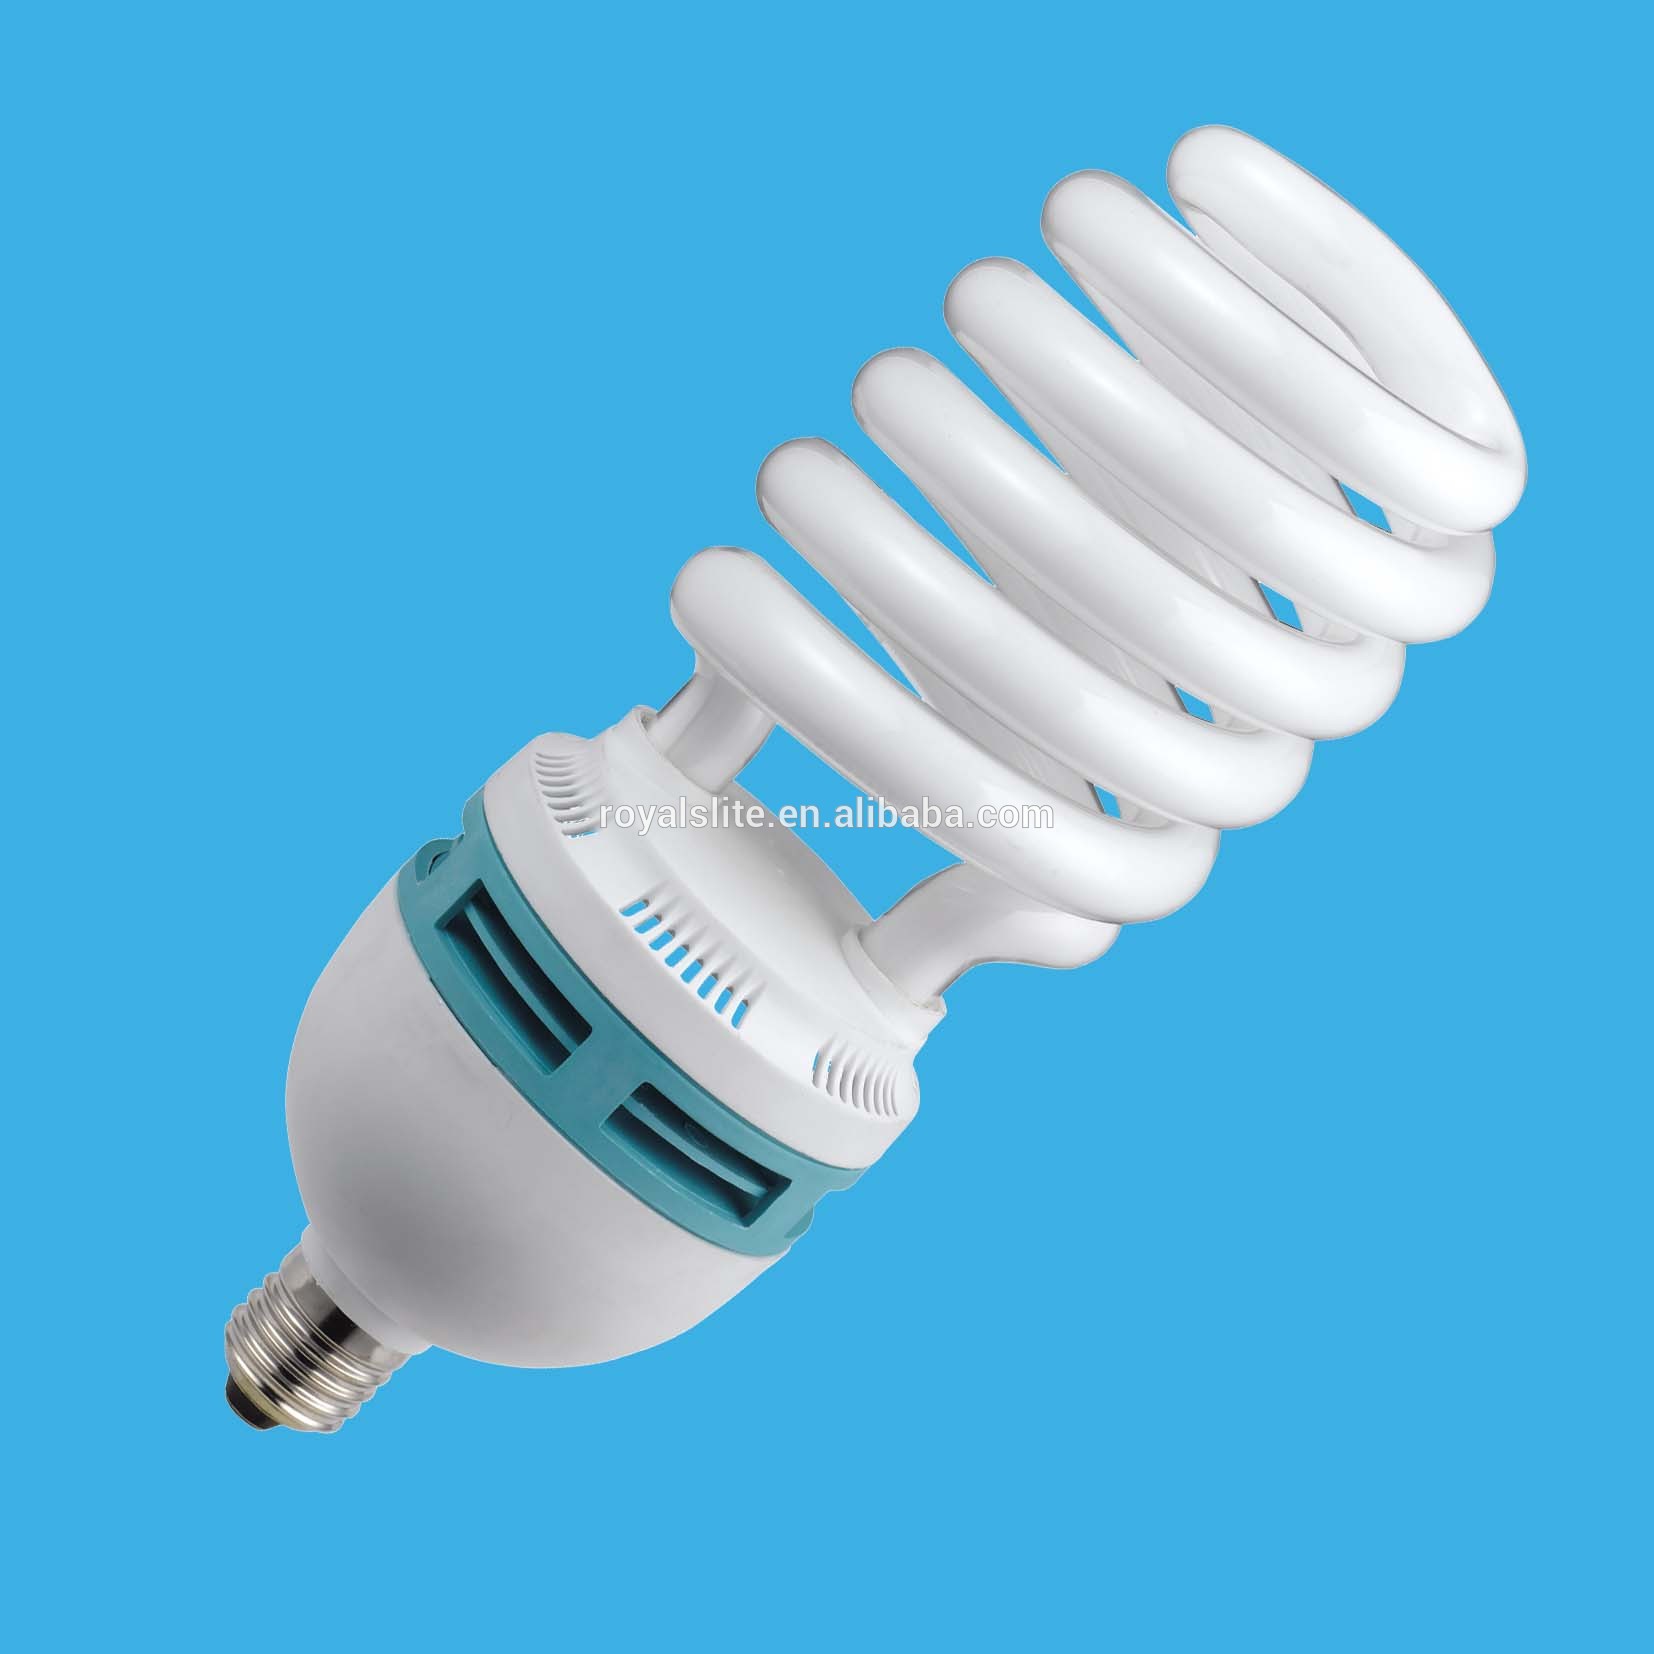 NEW!!! China market of electronic trending hot products electric bulb